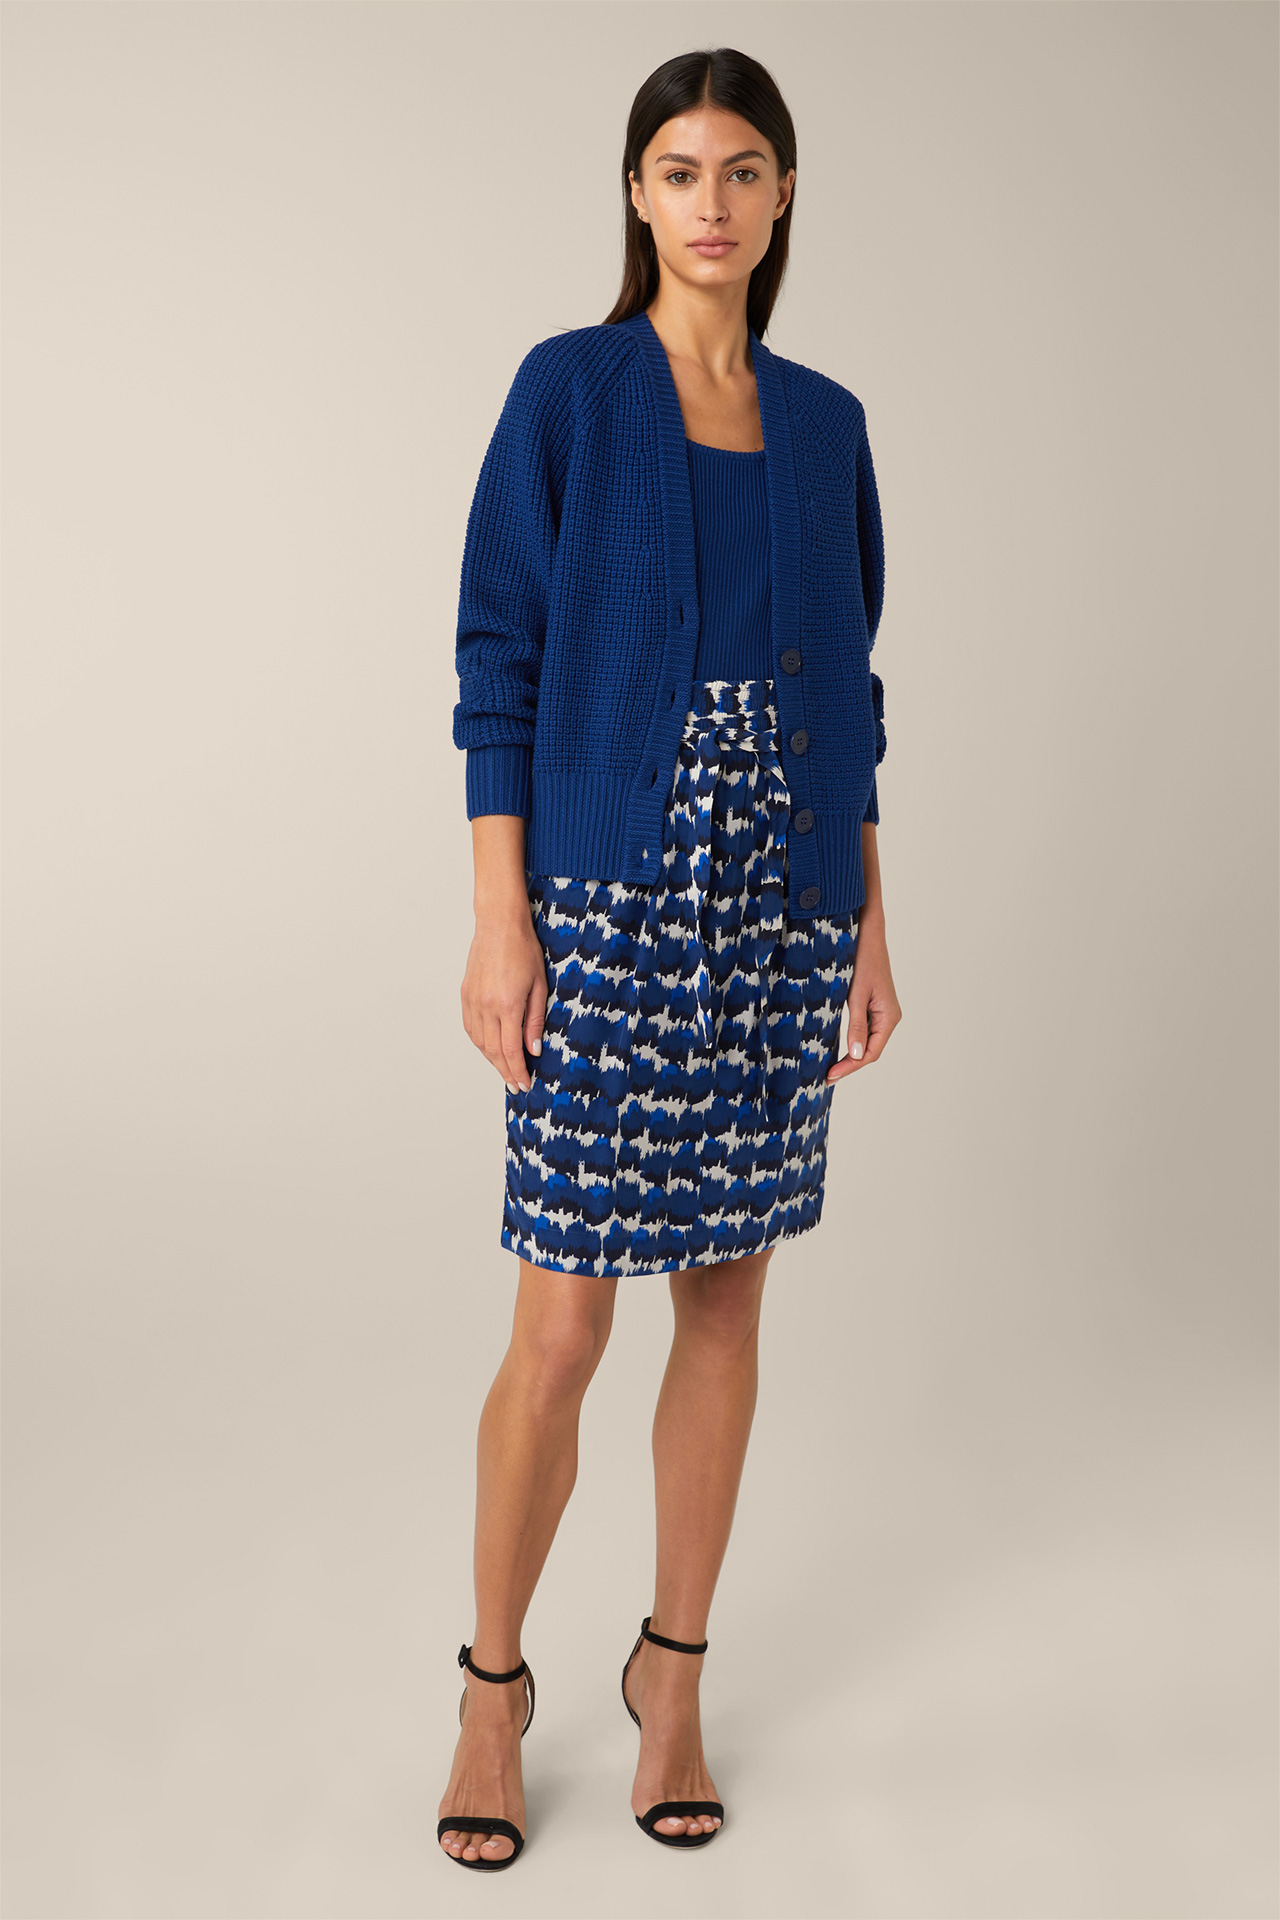 Printed Skirt with Silk in Navy, Blue and Ecru